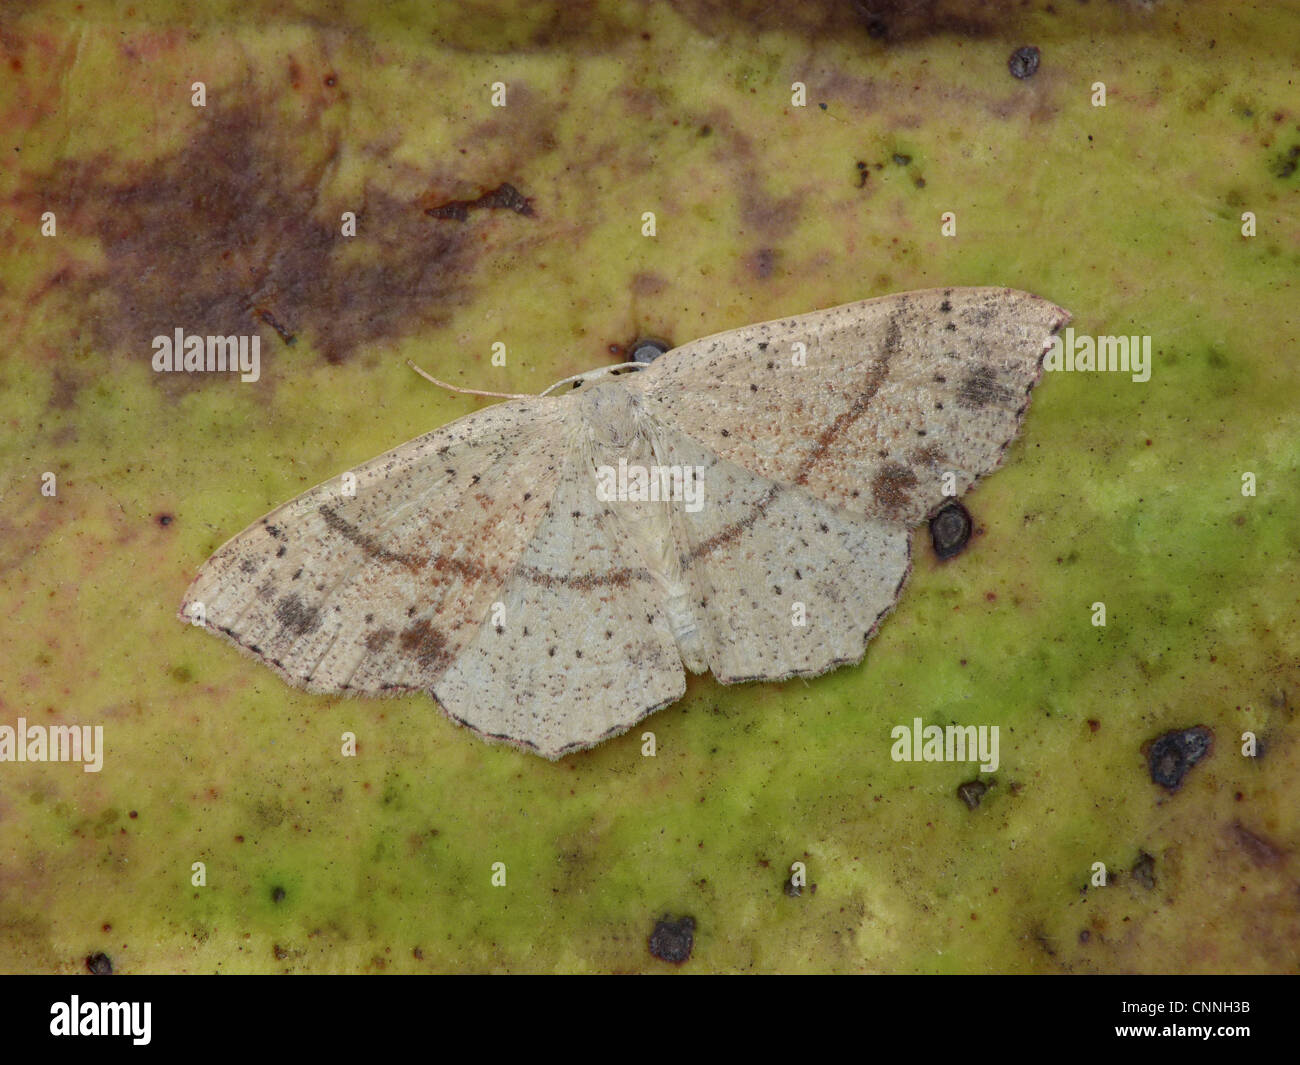 Maiden's Blush (Cyclophora punctaria) adult female, resting on decaying leaf, Cannobina Valley, Piedmont, Northern Italy, july Stock Photo